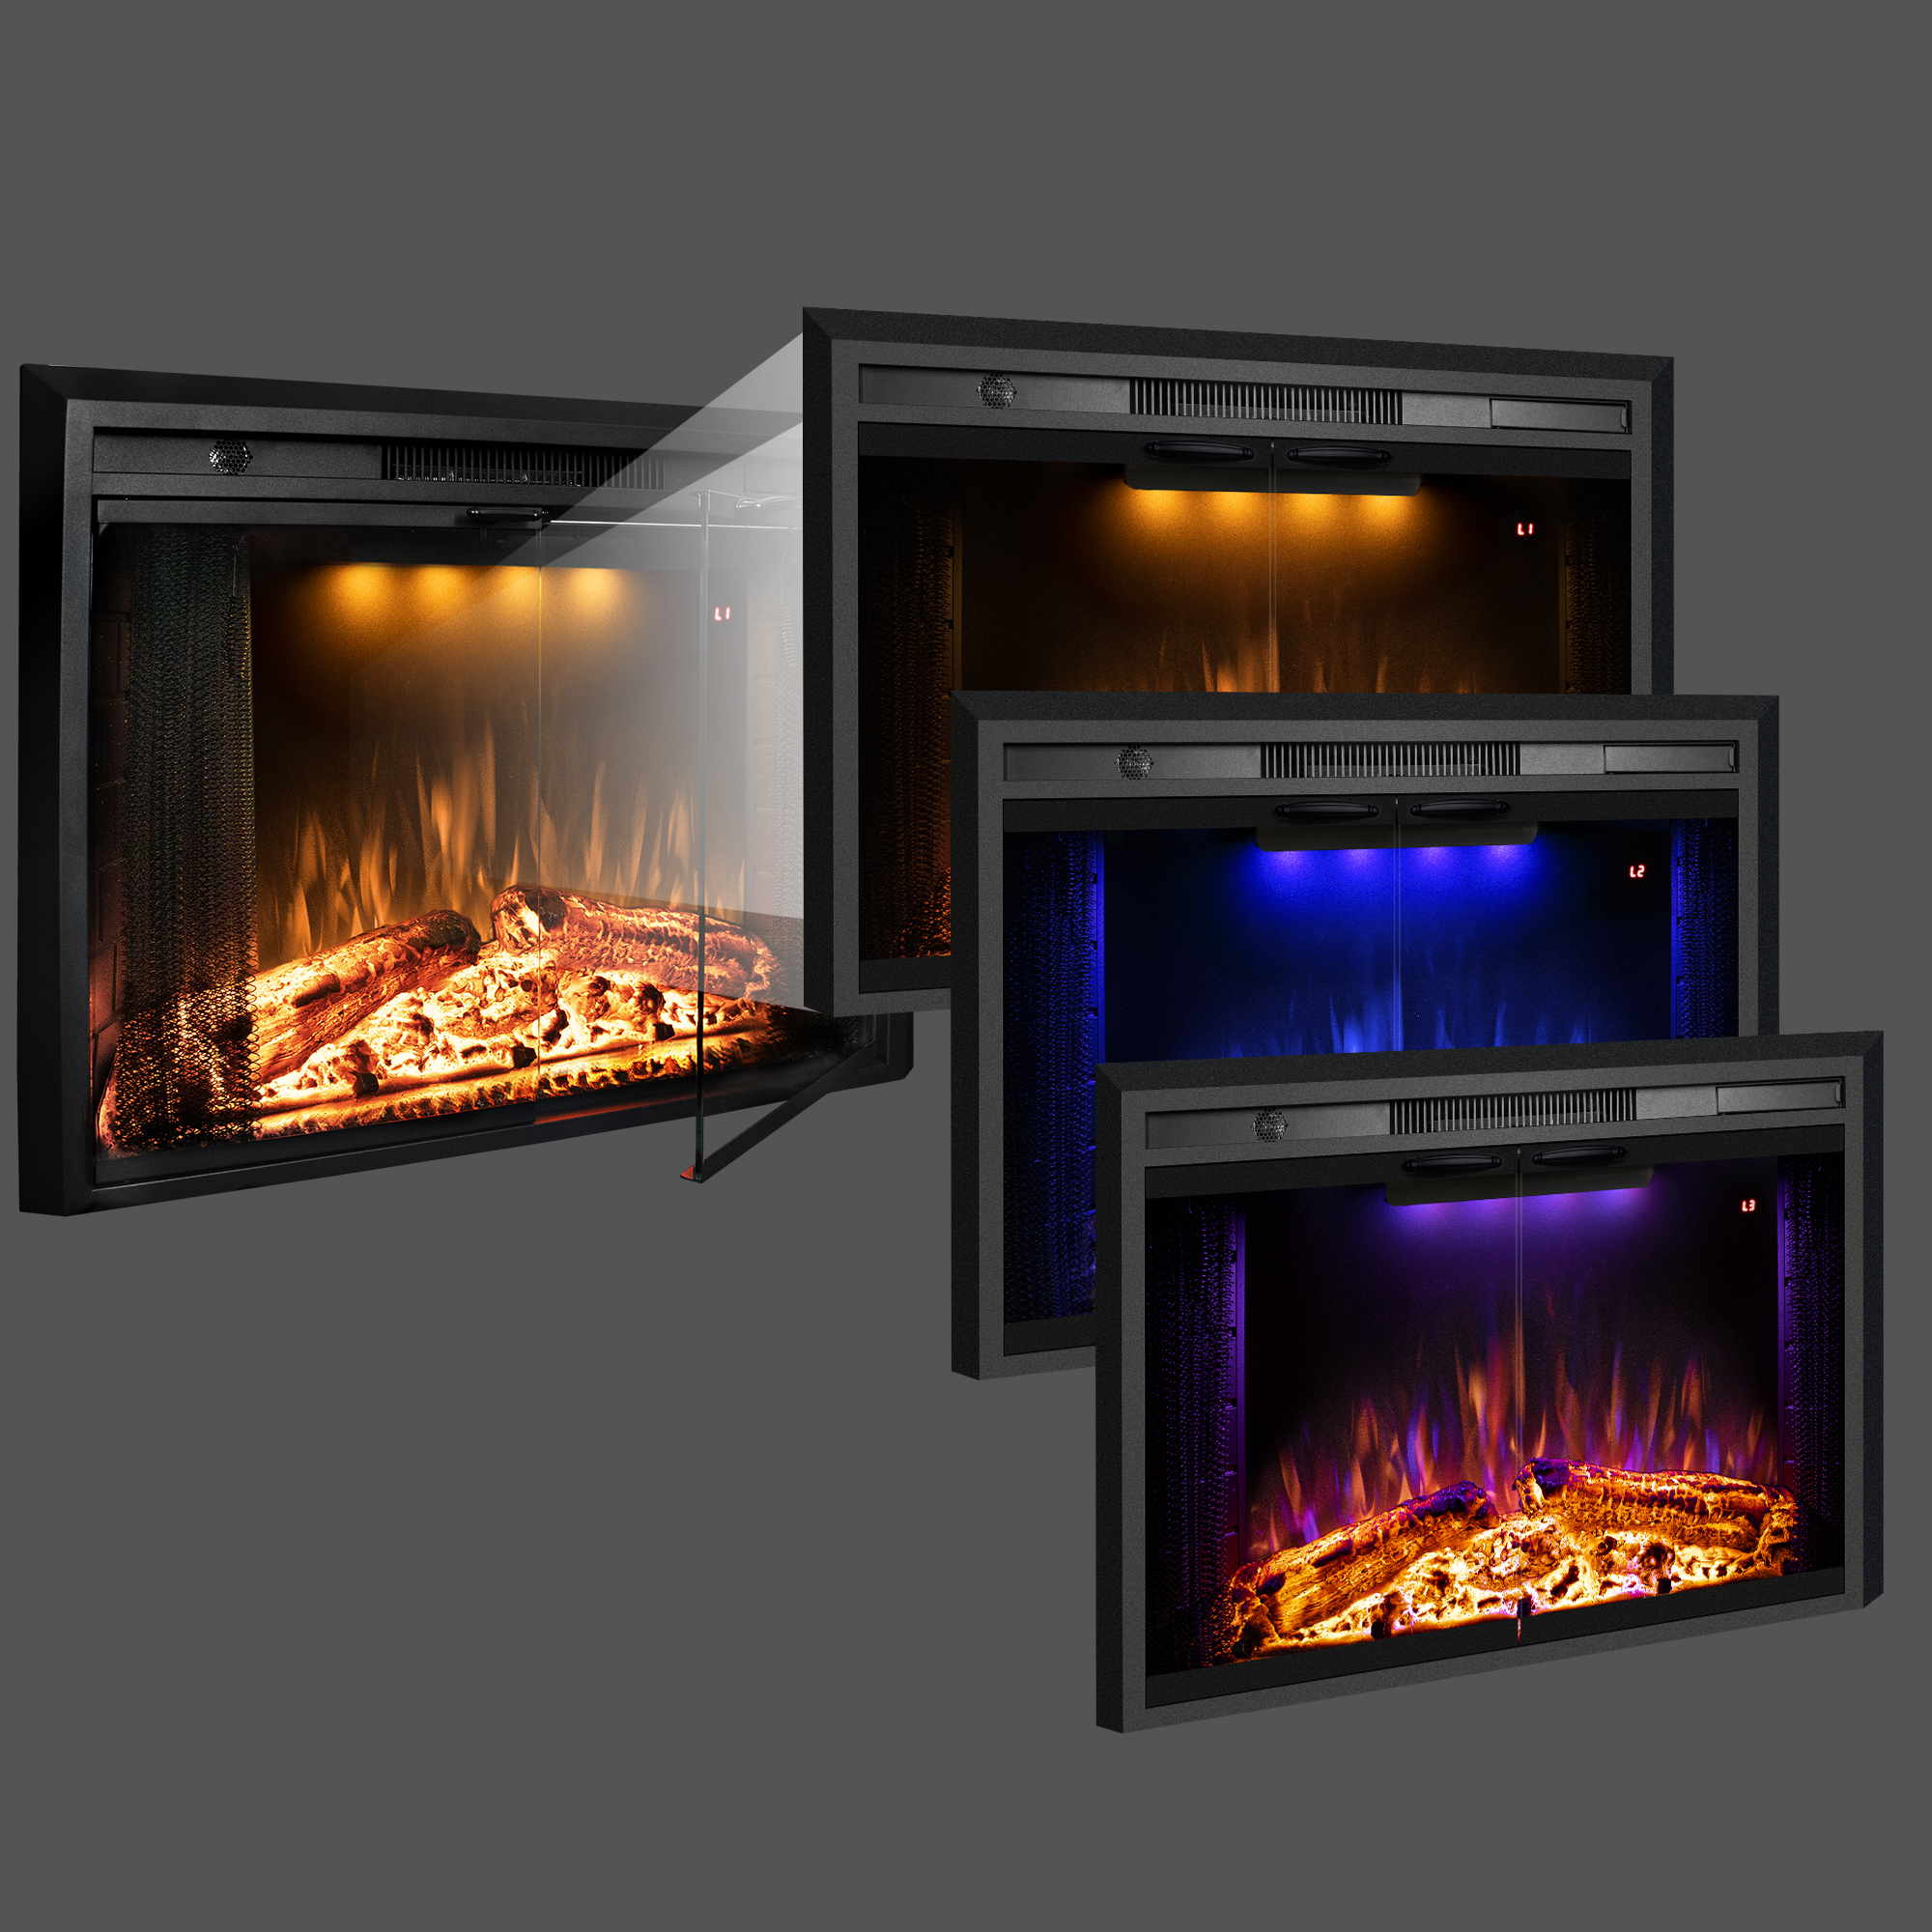 Valuxhome Electric Fireplace Inserts with Glass Door , Flames & Crackling Sounds